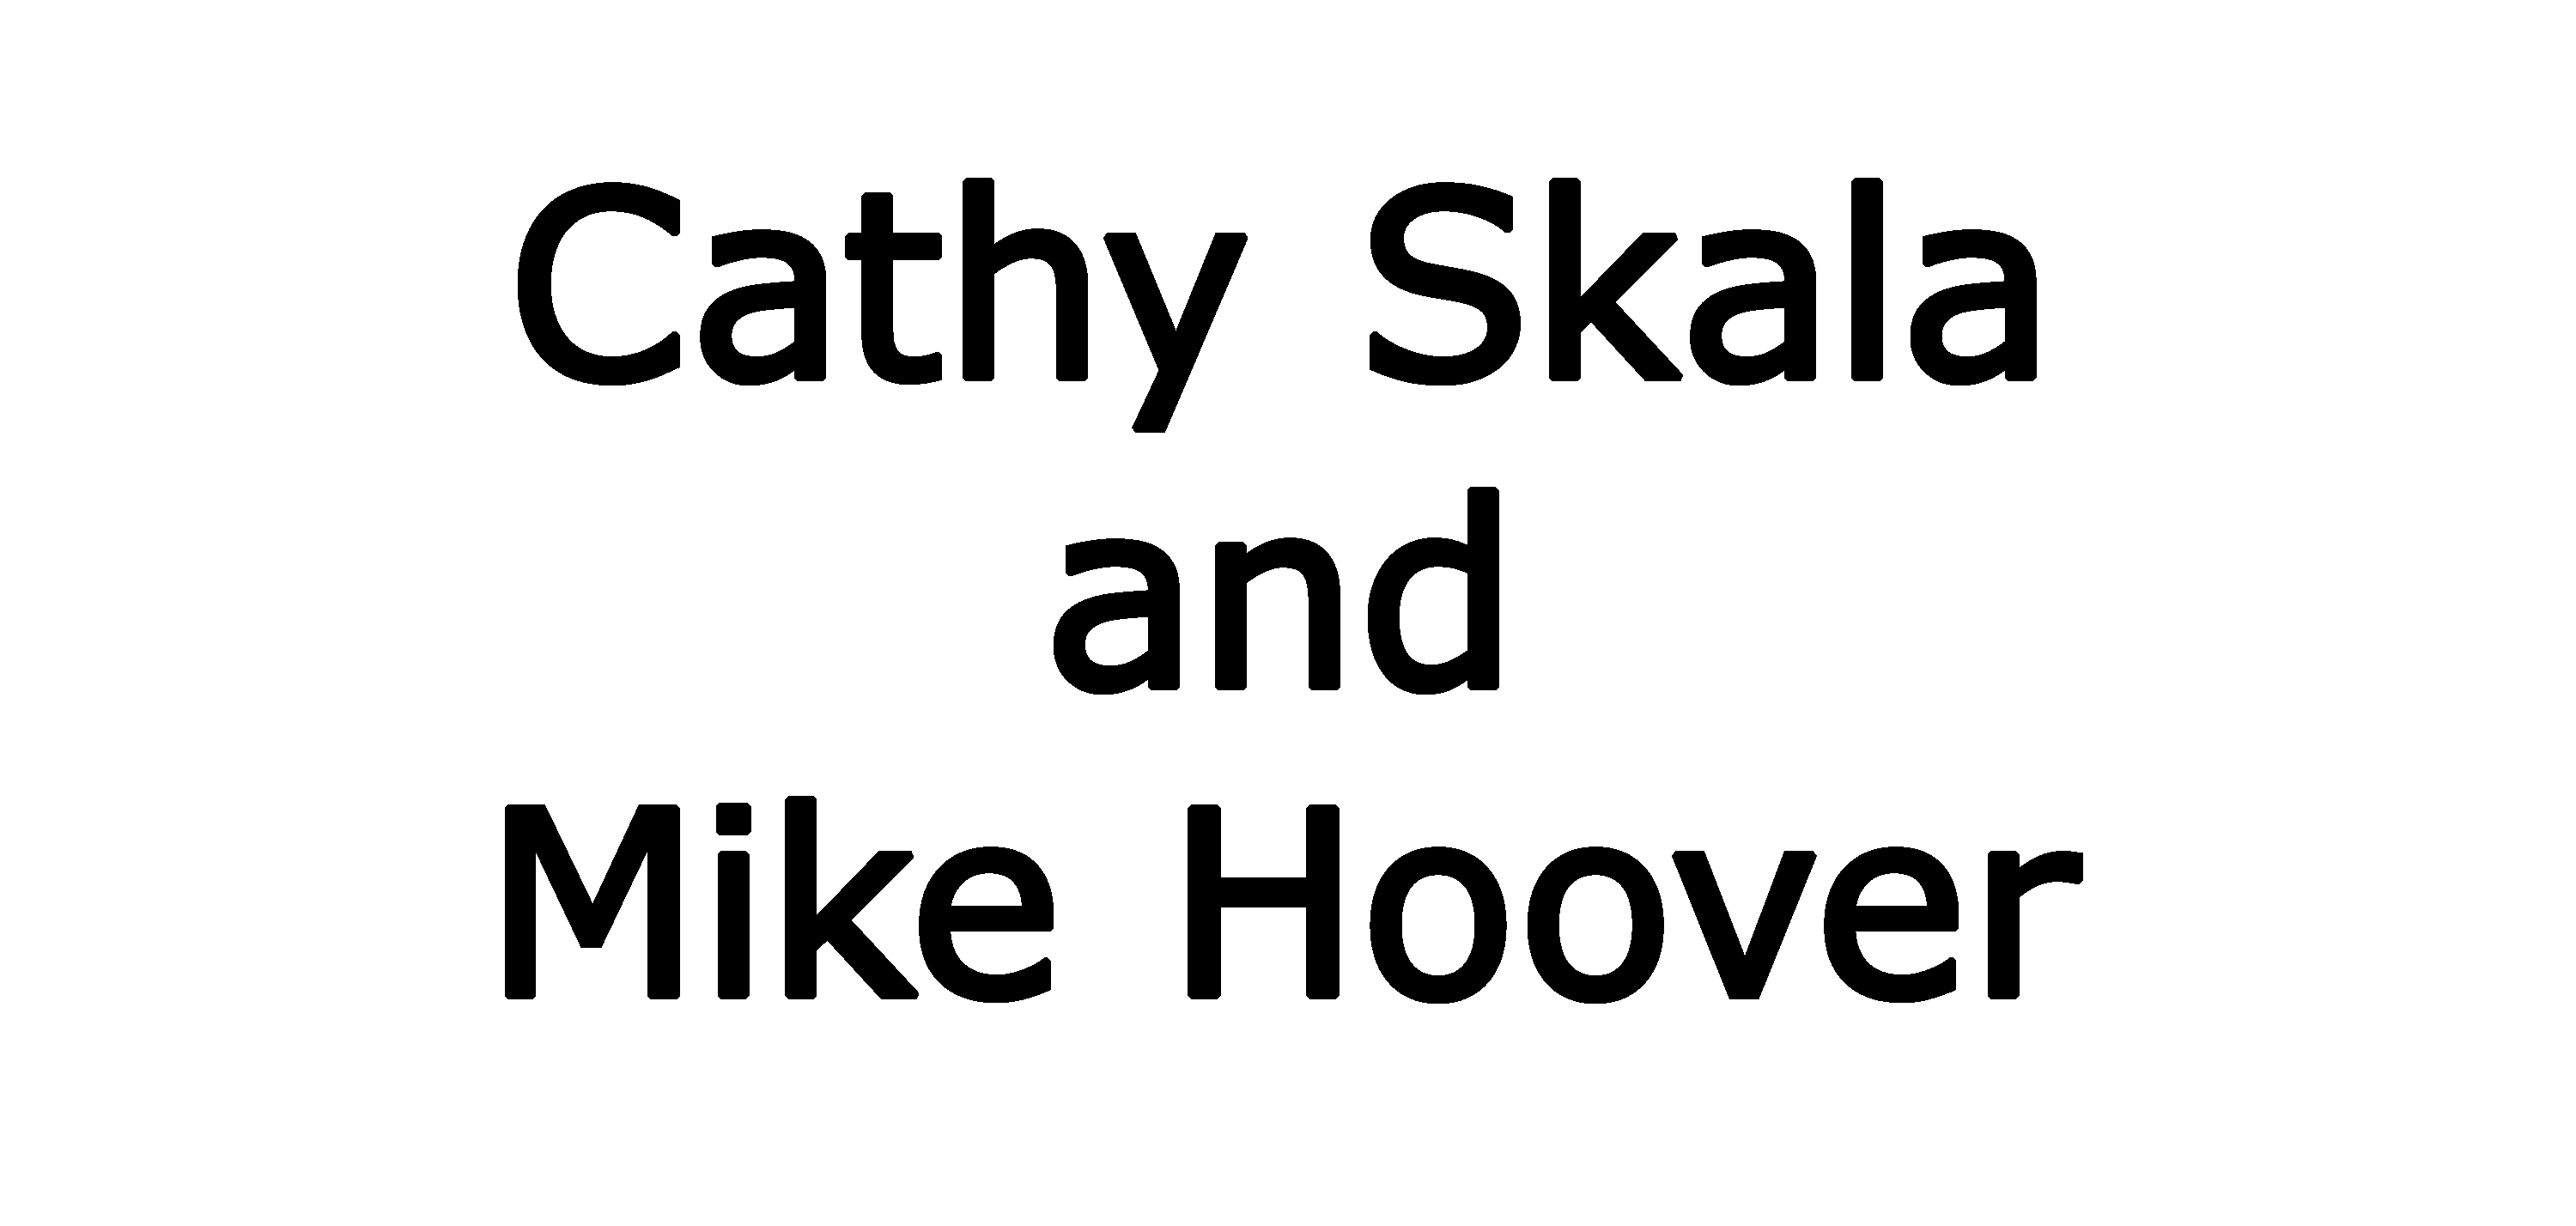 Cathy Skala and Mike Hoover